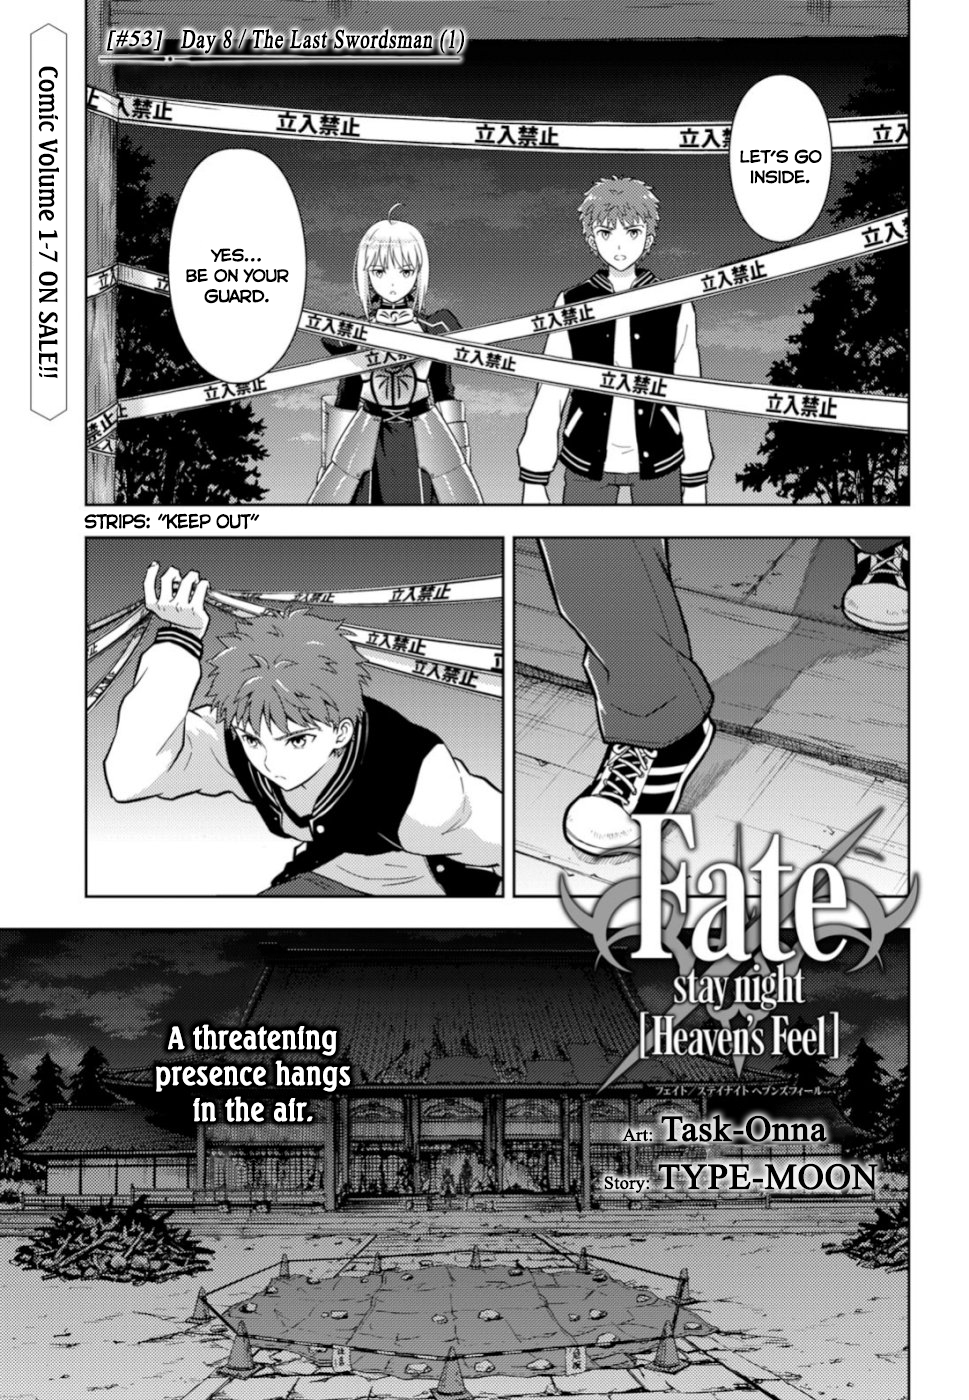 Fate/stay Night - Heaven's Feel Vol.8 Chapter 53: Day 8 / The Last Swordsman (1) - Picture 1